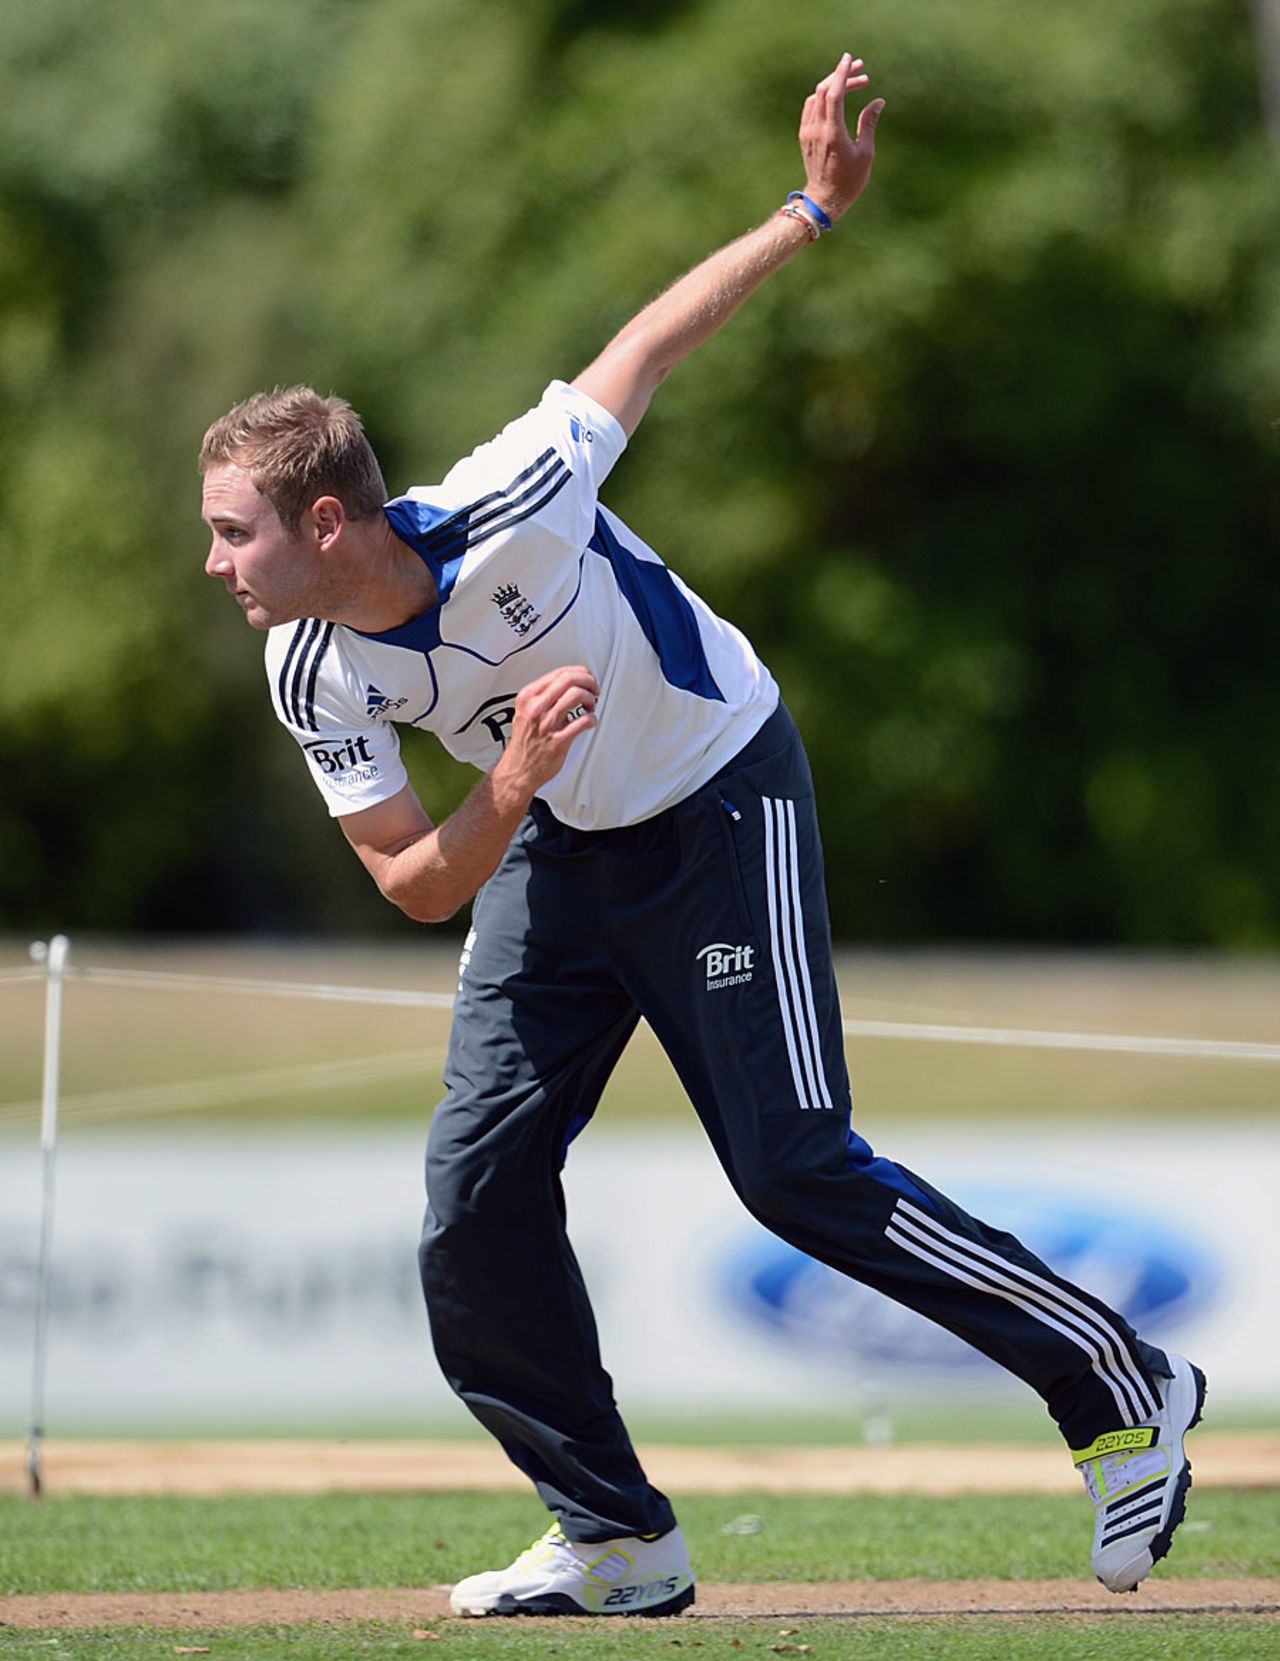 Stuart Broad bowls at a practice session ahead of the first Test against New Zealand in Dunedin, New Zealand v England, 1st Test, Dunedin, March 5. 2013